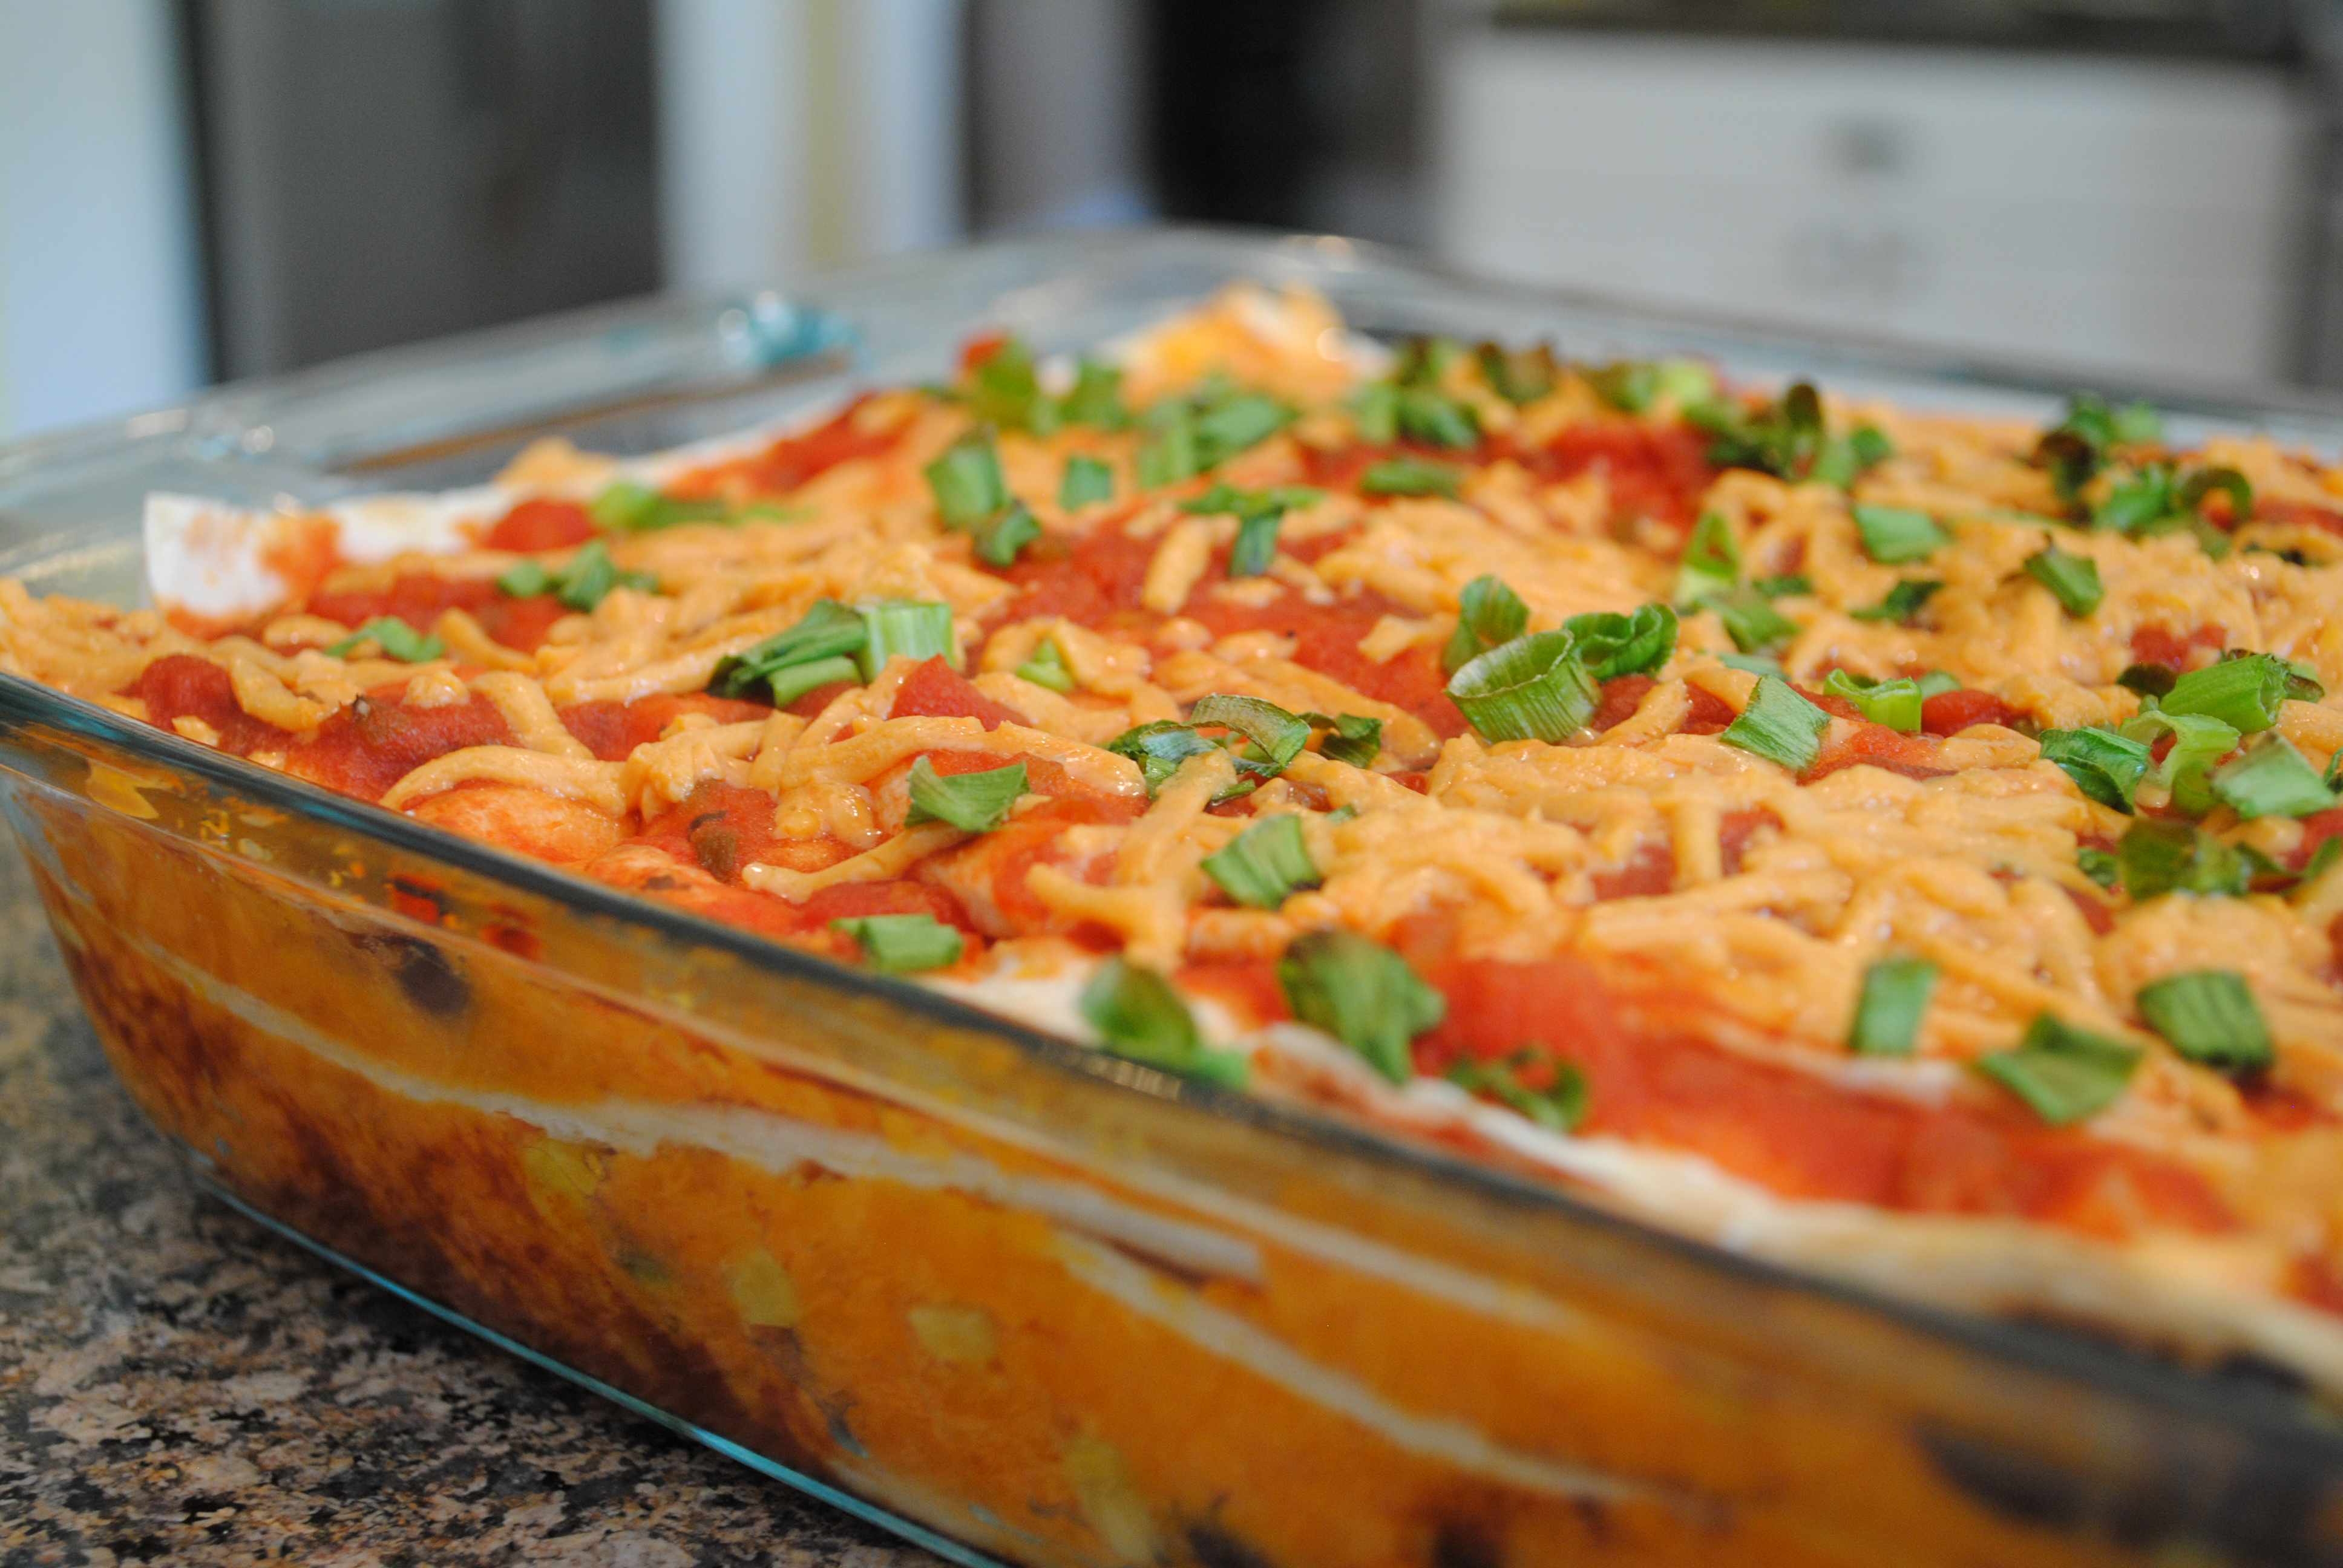 What is a good recipe for Mexican tortilla casserole?